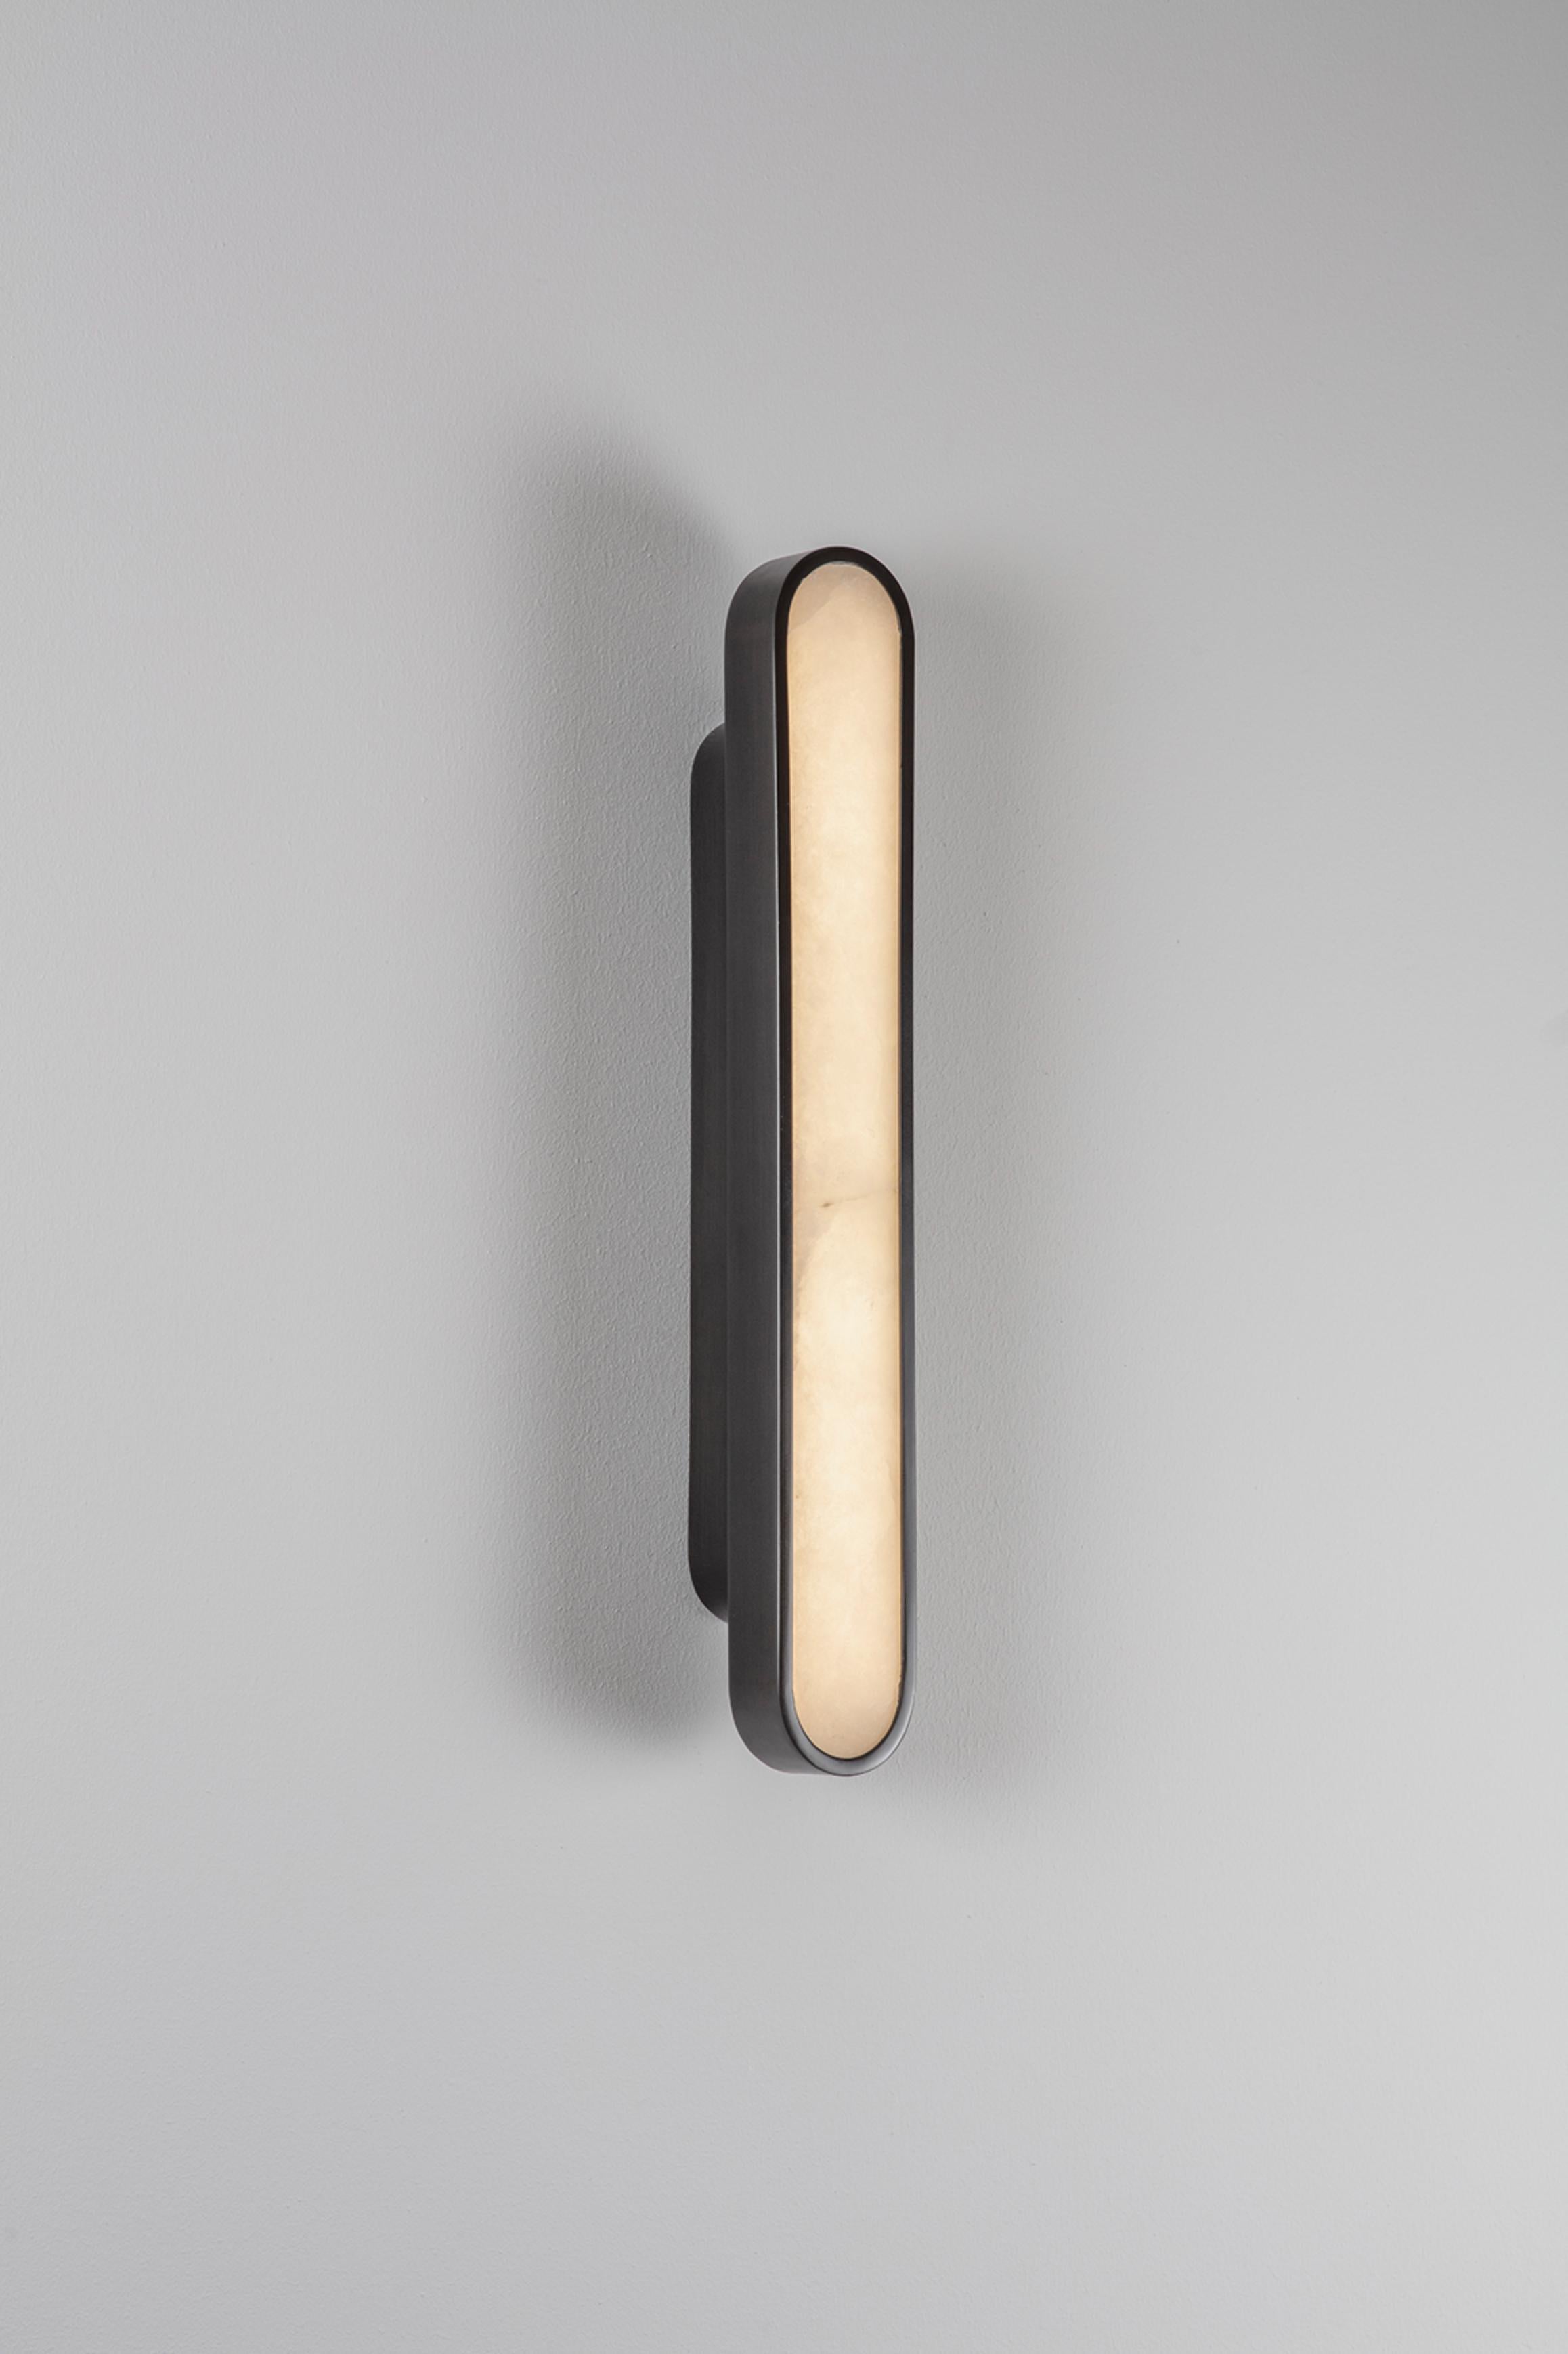 Capsule black wall light by Square in Circle
Dimensions: D 5 x W 5.5 x H 40 cm
Materials:Brushed brass/ opaque glass
Other finishes available.

Perfect rounded rectangular shape wall light. Metal wall light is neatly fixed with the same shape